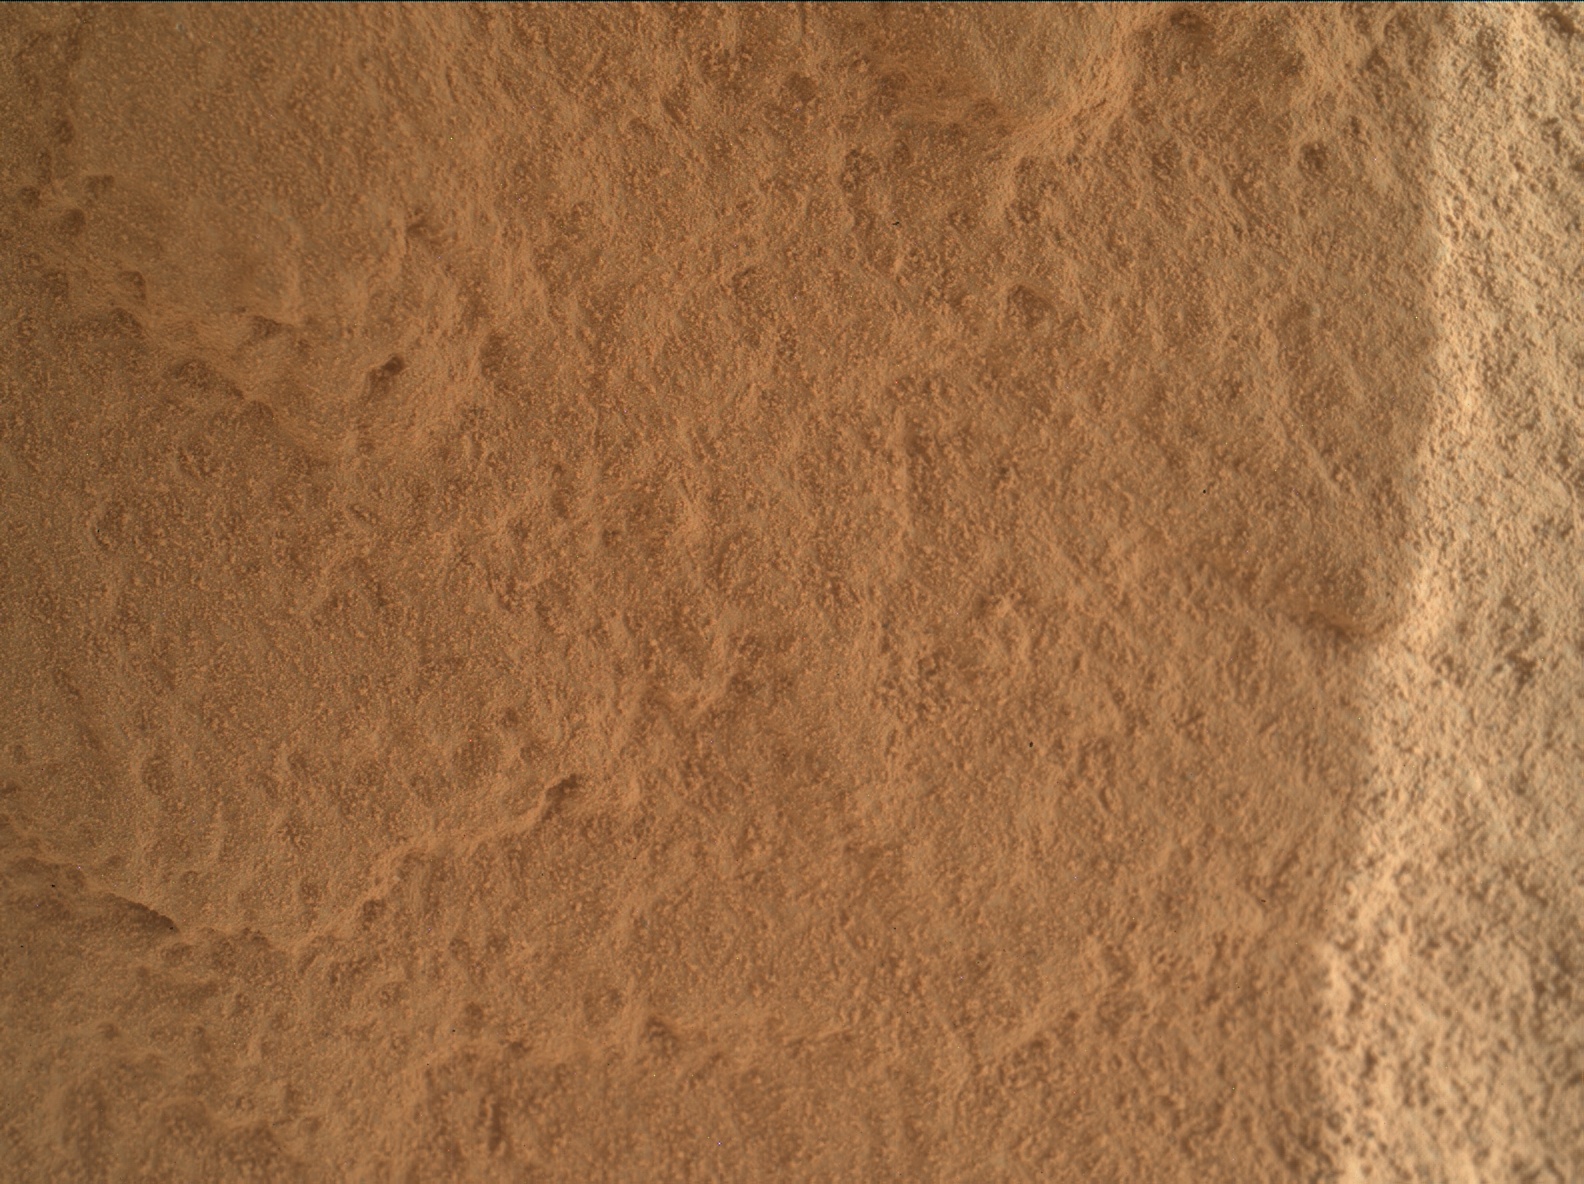 Nasa's Mars rover Curiosity acquired this image using its Mars Hand Lens Imager (MAHLI) on Sol 3650